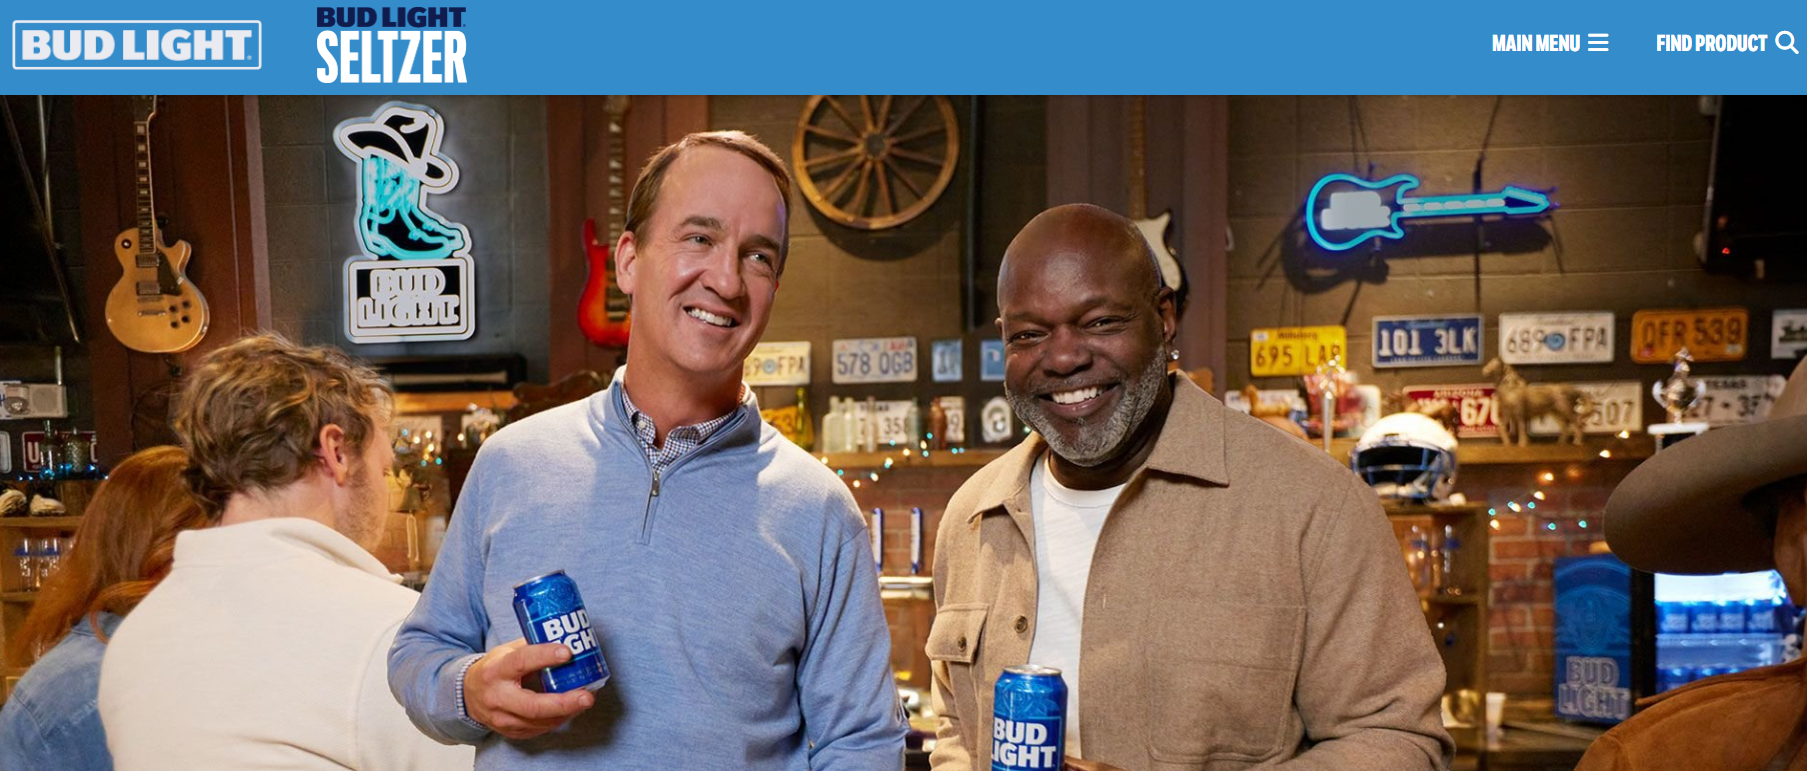 Bud Light Gives Away Free Beer